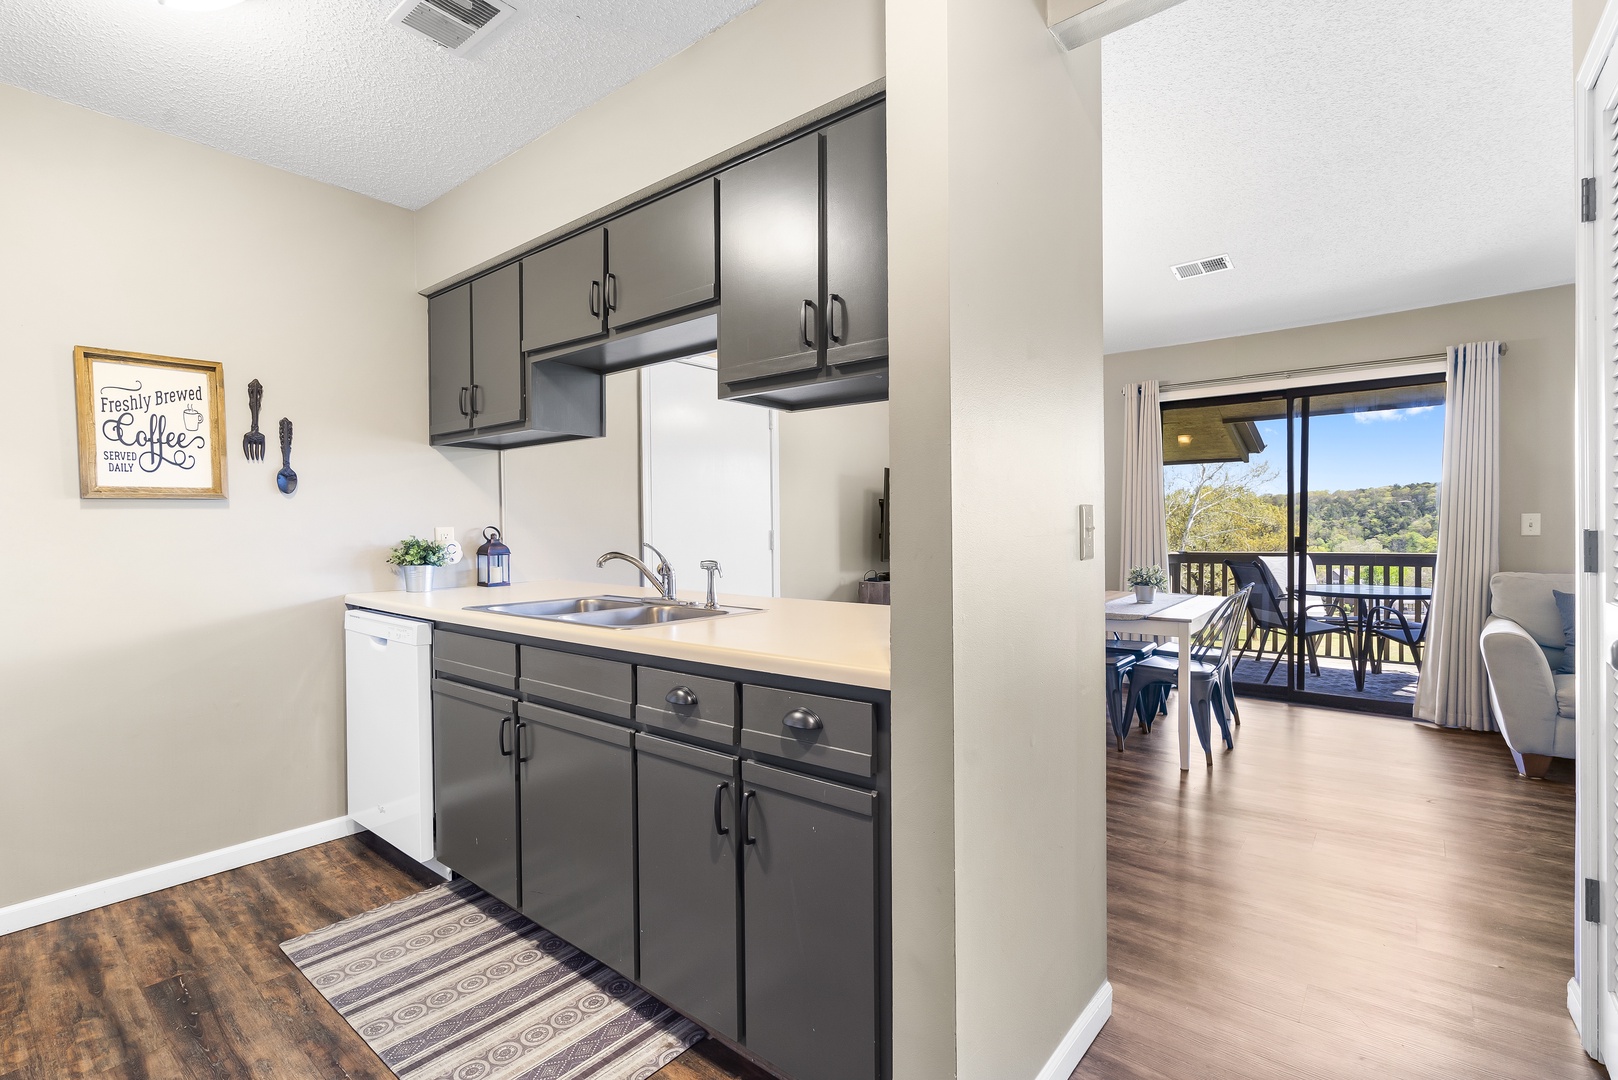 Unit 20’s breezy kitchen showcases ample space & every home comfort